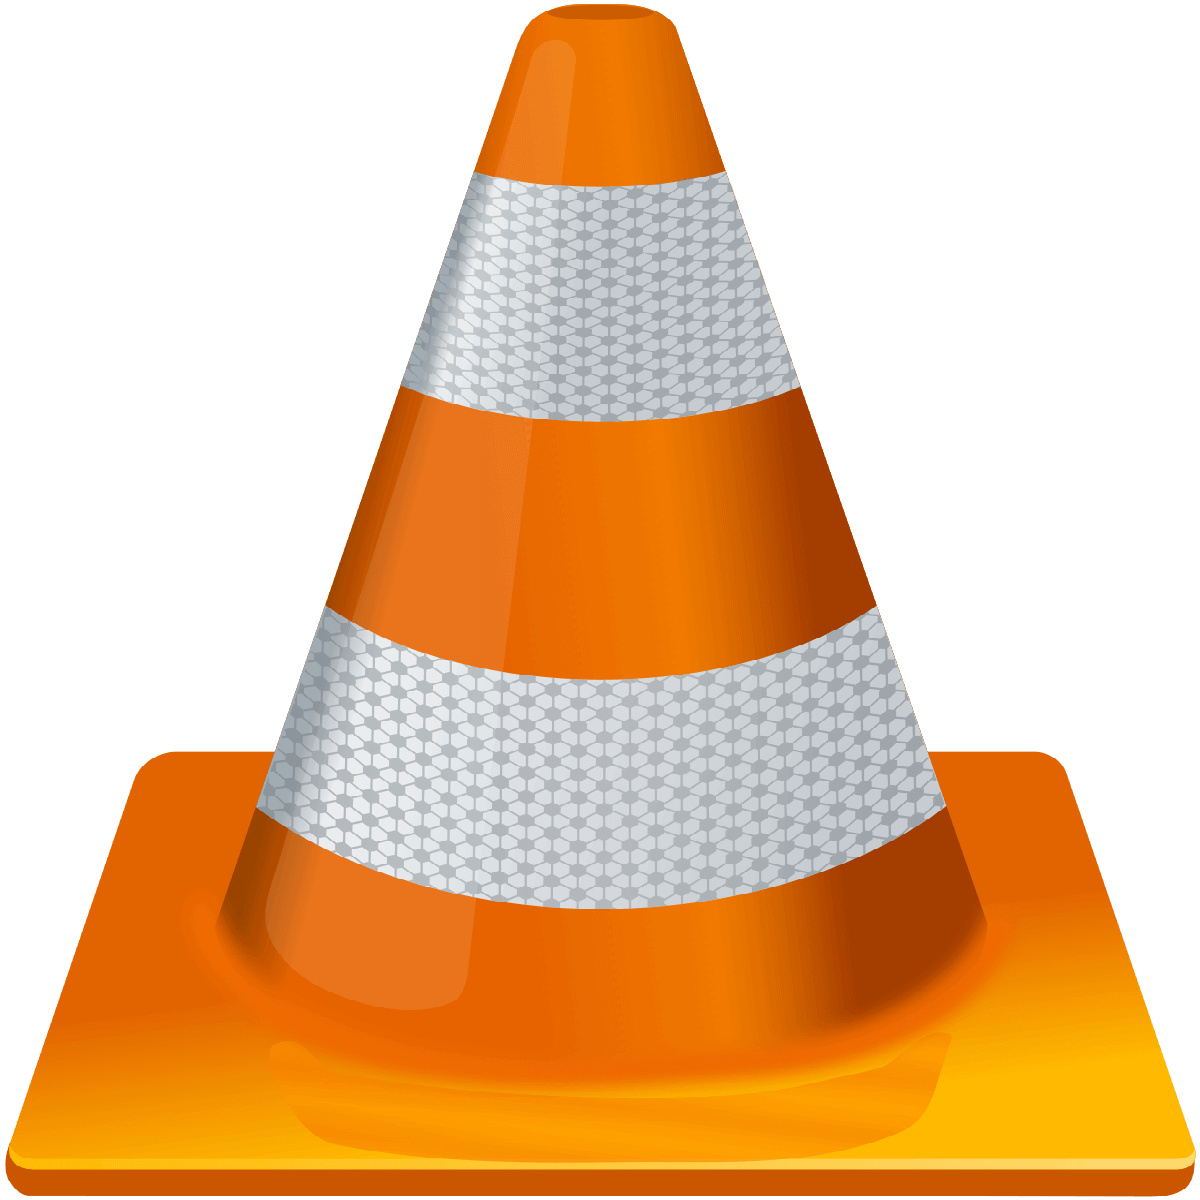 vlc media player what else is there windows